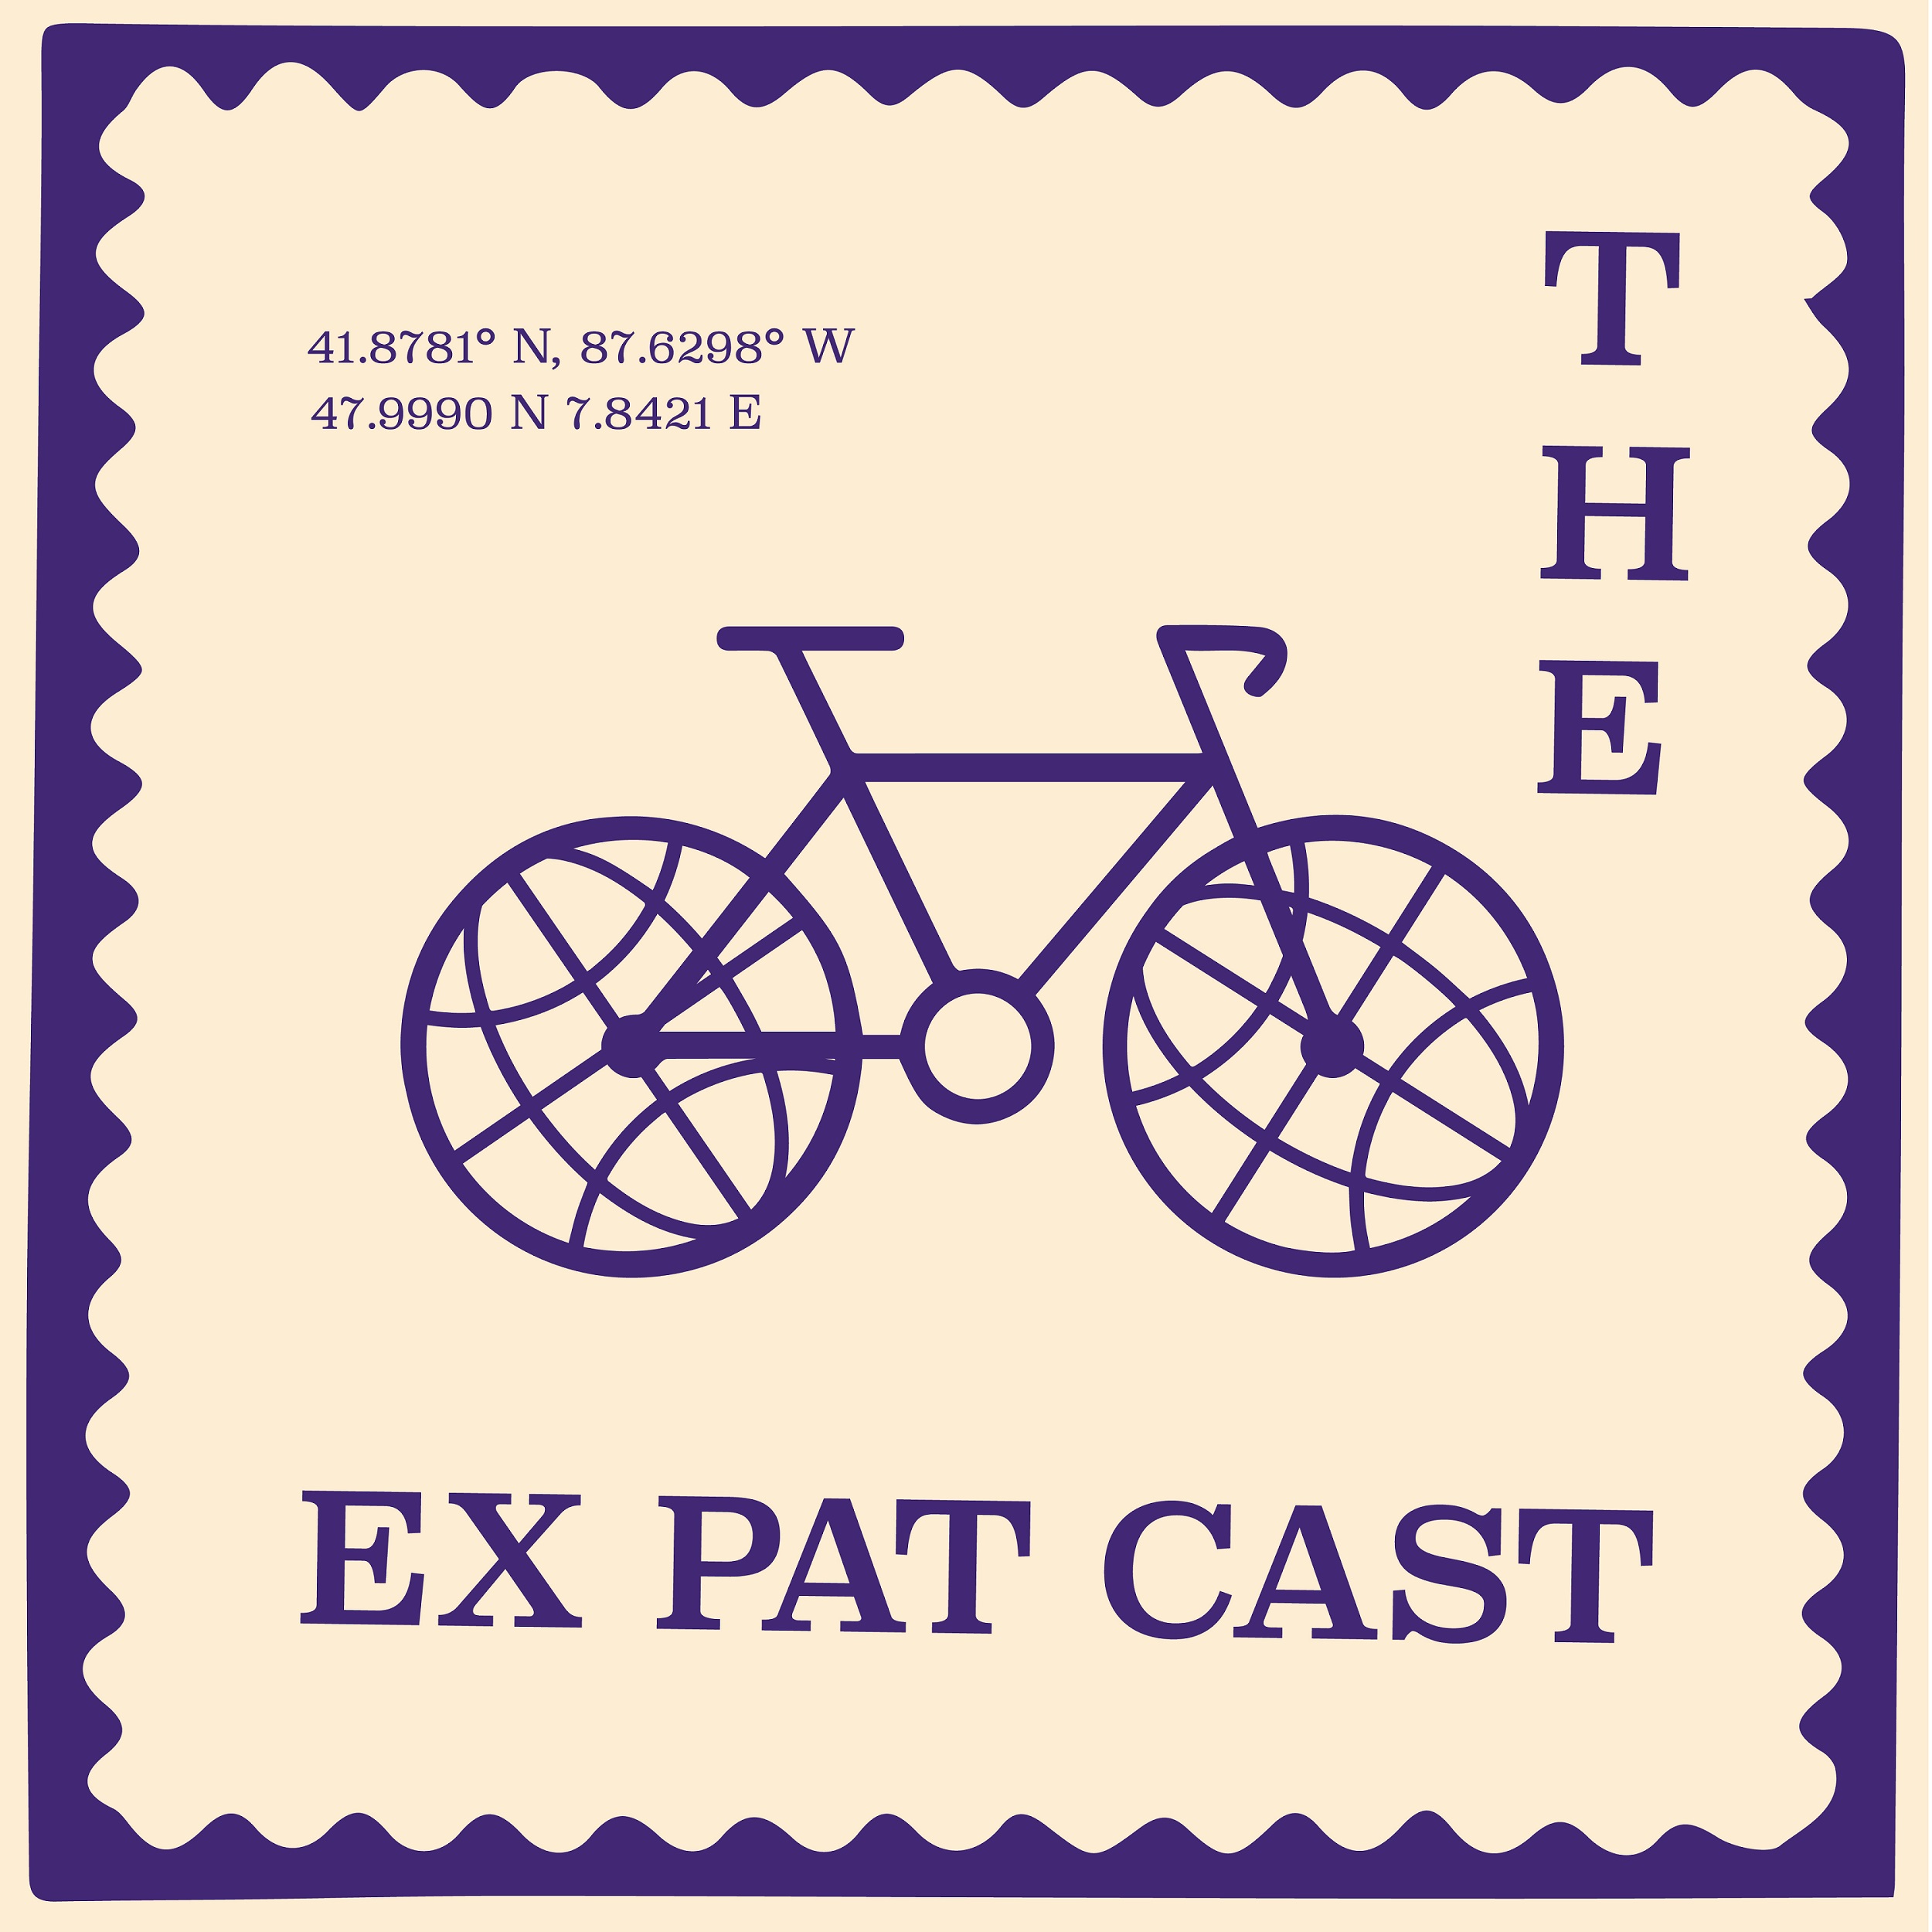 The Expat Cast: free chat between friend crushes.